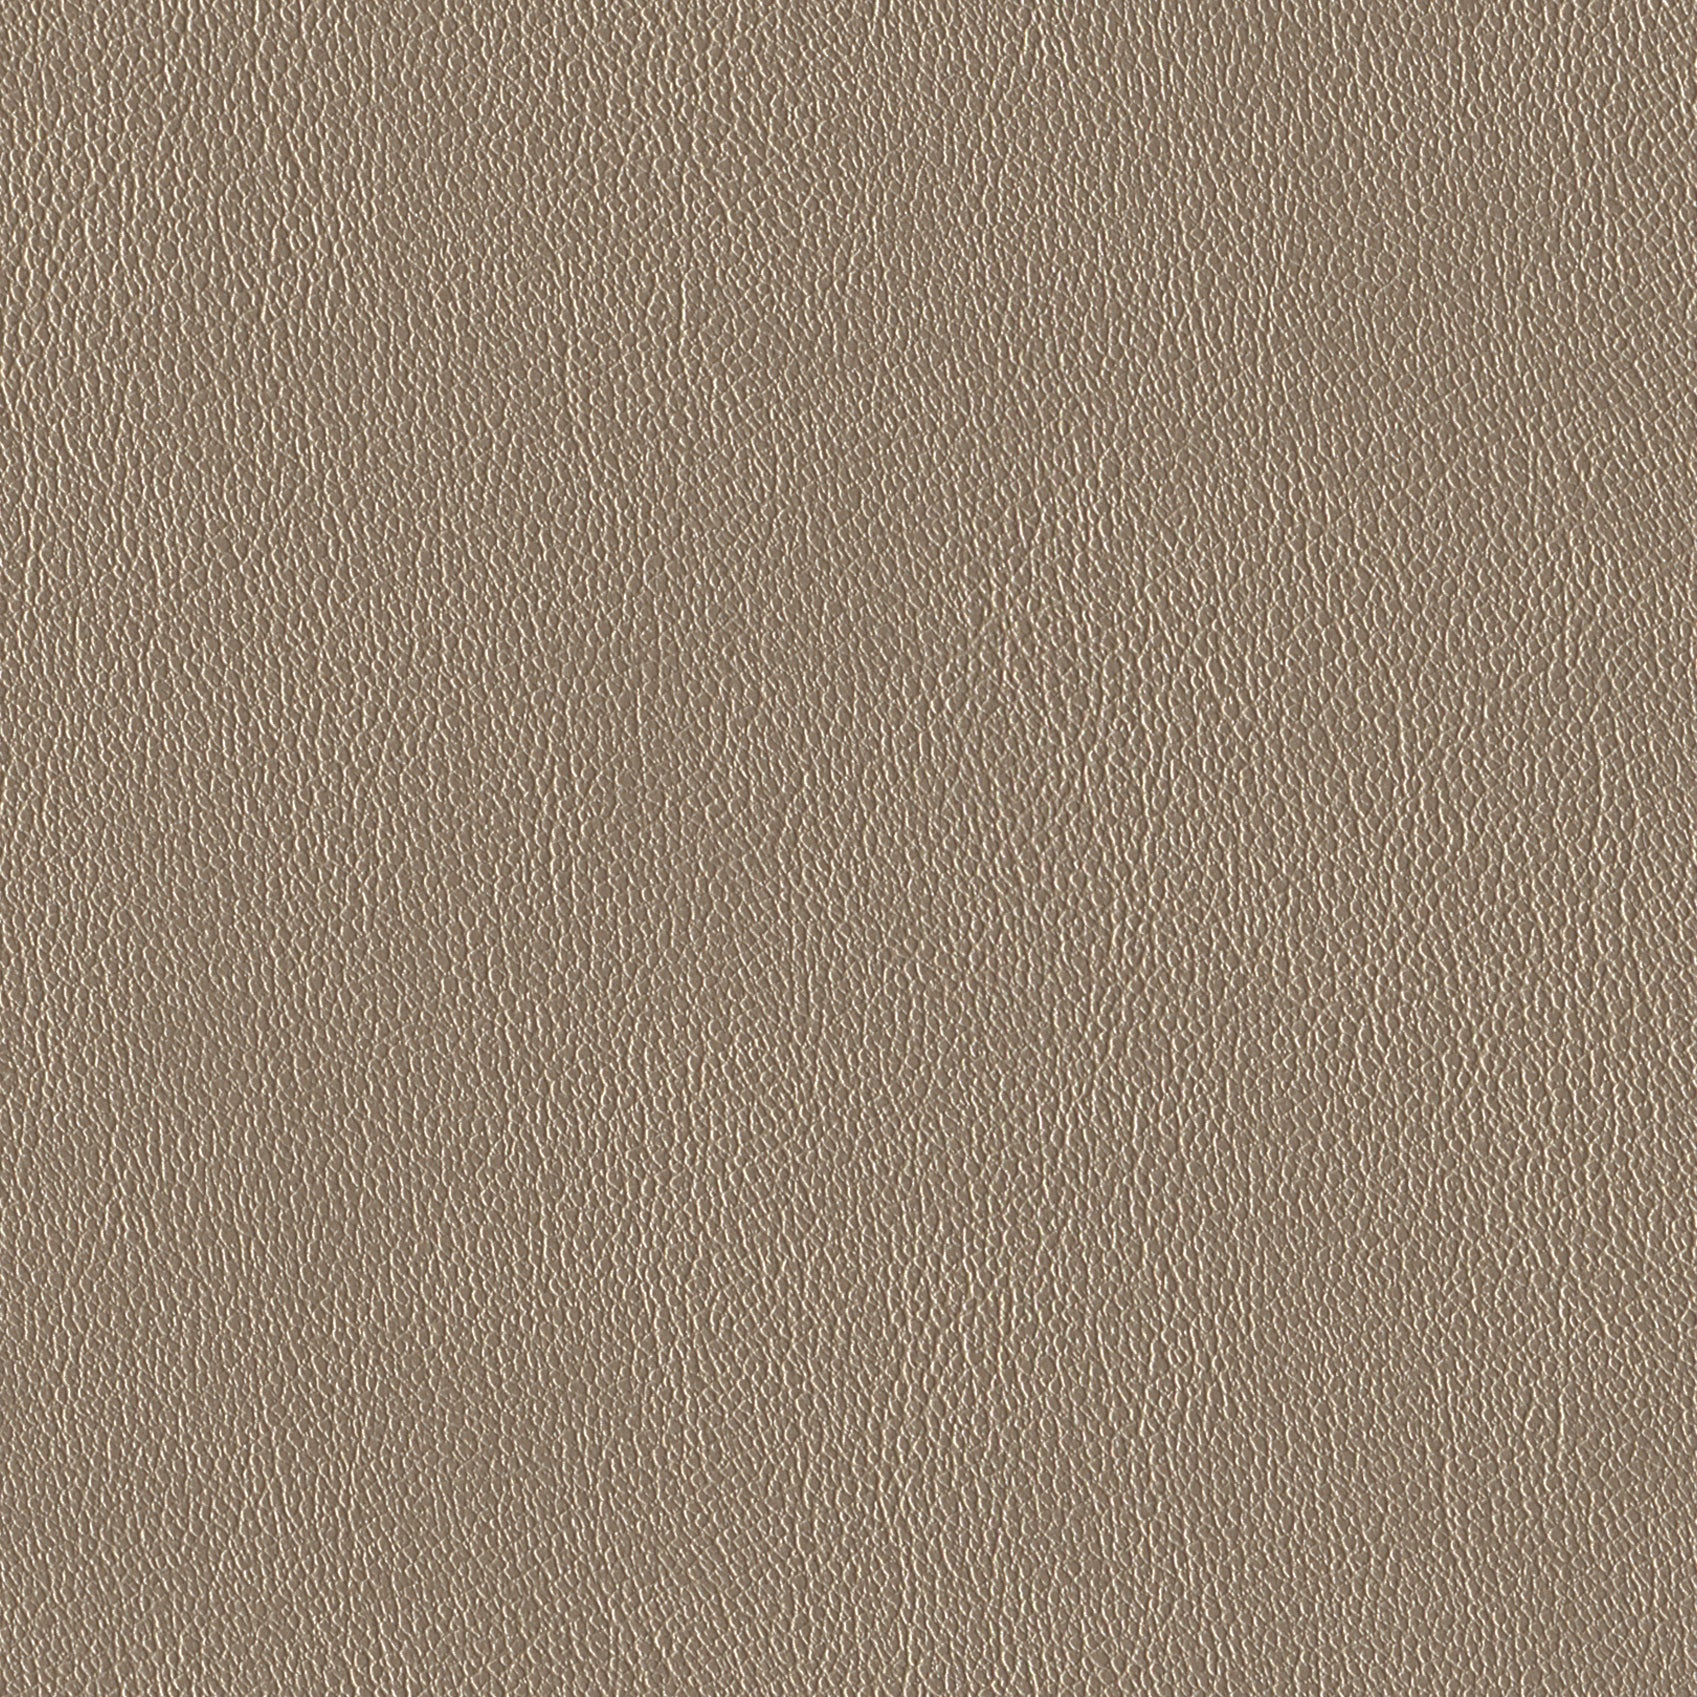 Andriali-Contract-Vinyl_Upholstery-Design-WesternFR5-Color-017Champagne-Width-140cm